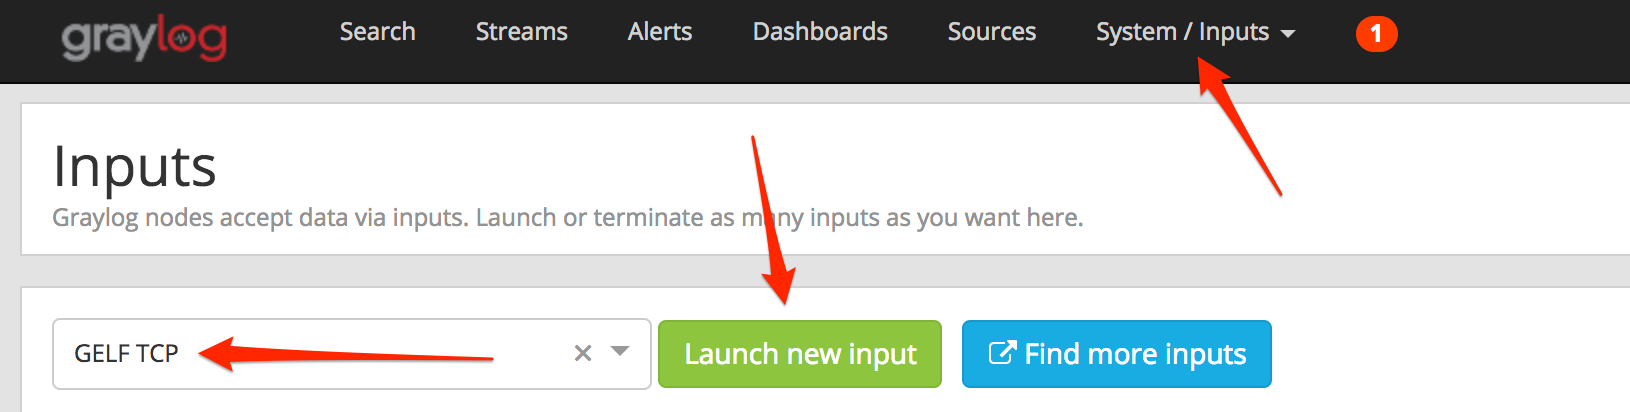 launch_input.png